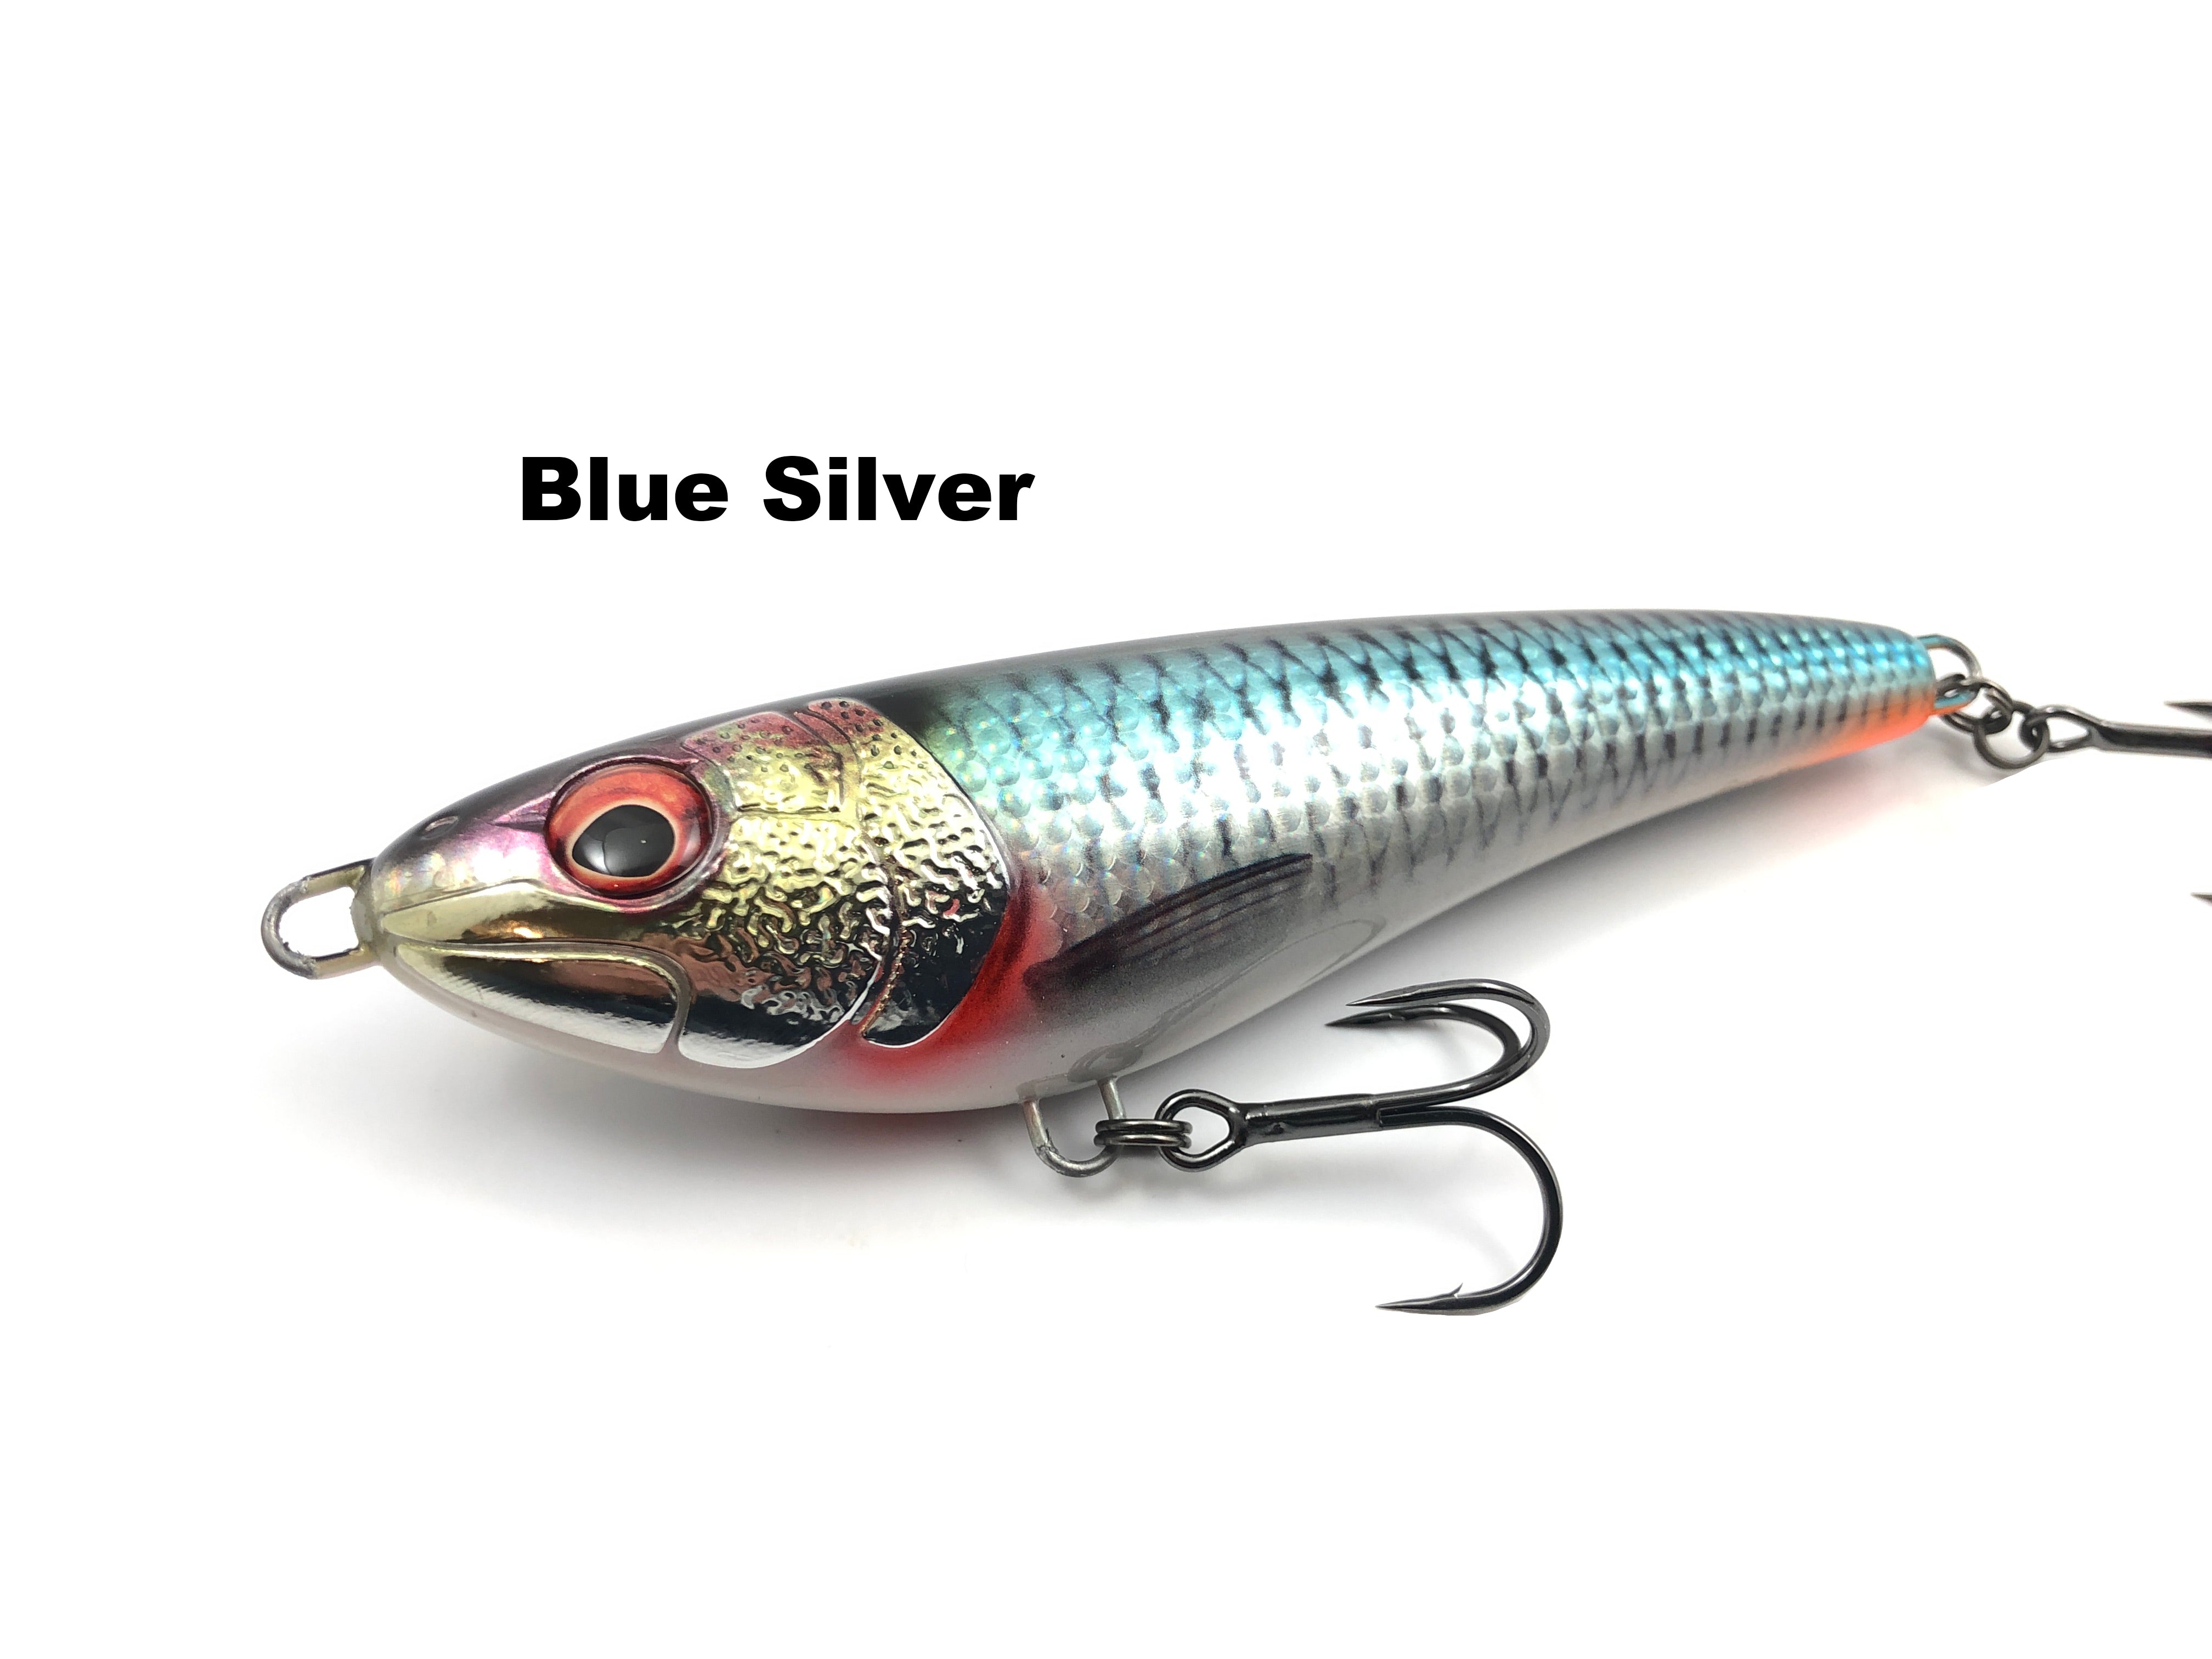  Savage Gear Freestyler V2 Freshwater Fishing Lure, Blue  Silver, 4in, Delivers Lively & Erratic Action, Durable Construction, Ideal  for, Bass, Walleye, Pike and Other Large Predator Fish : Sports 